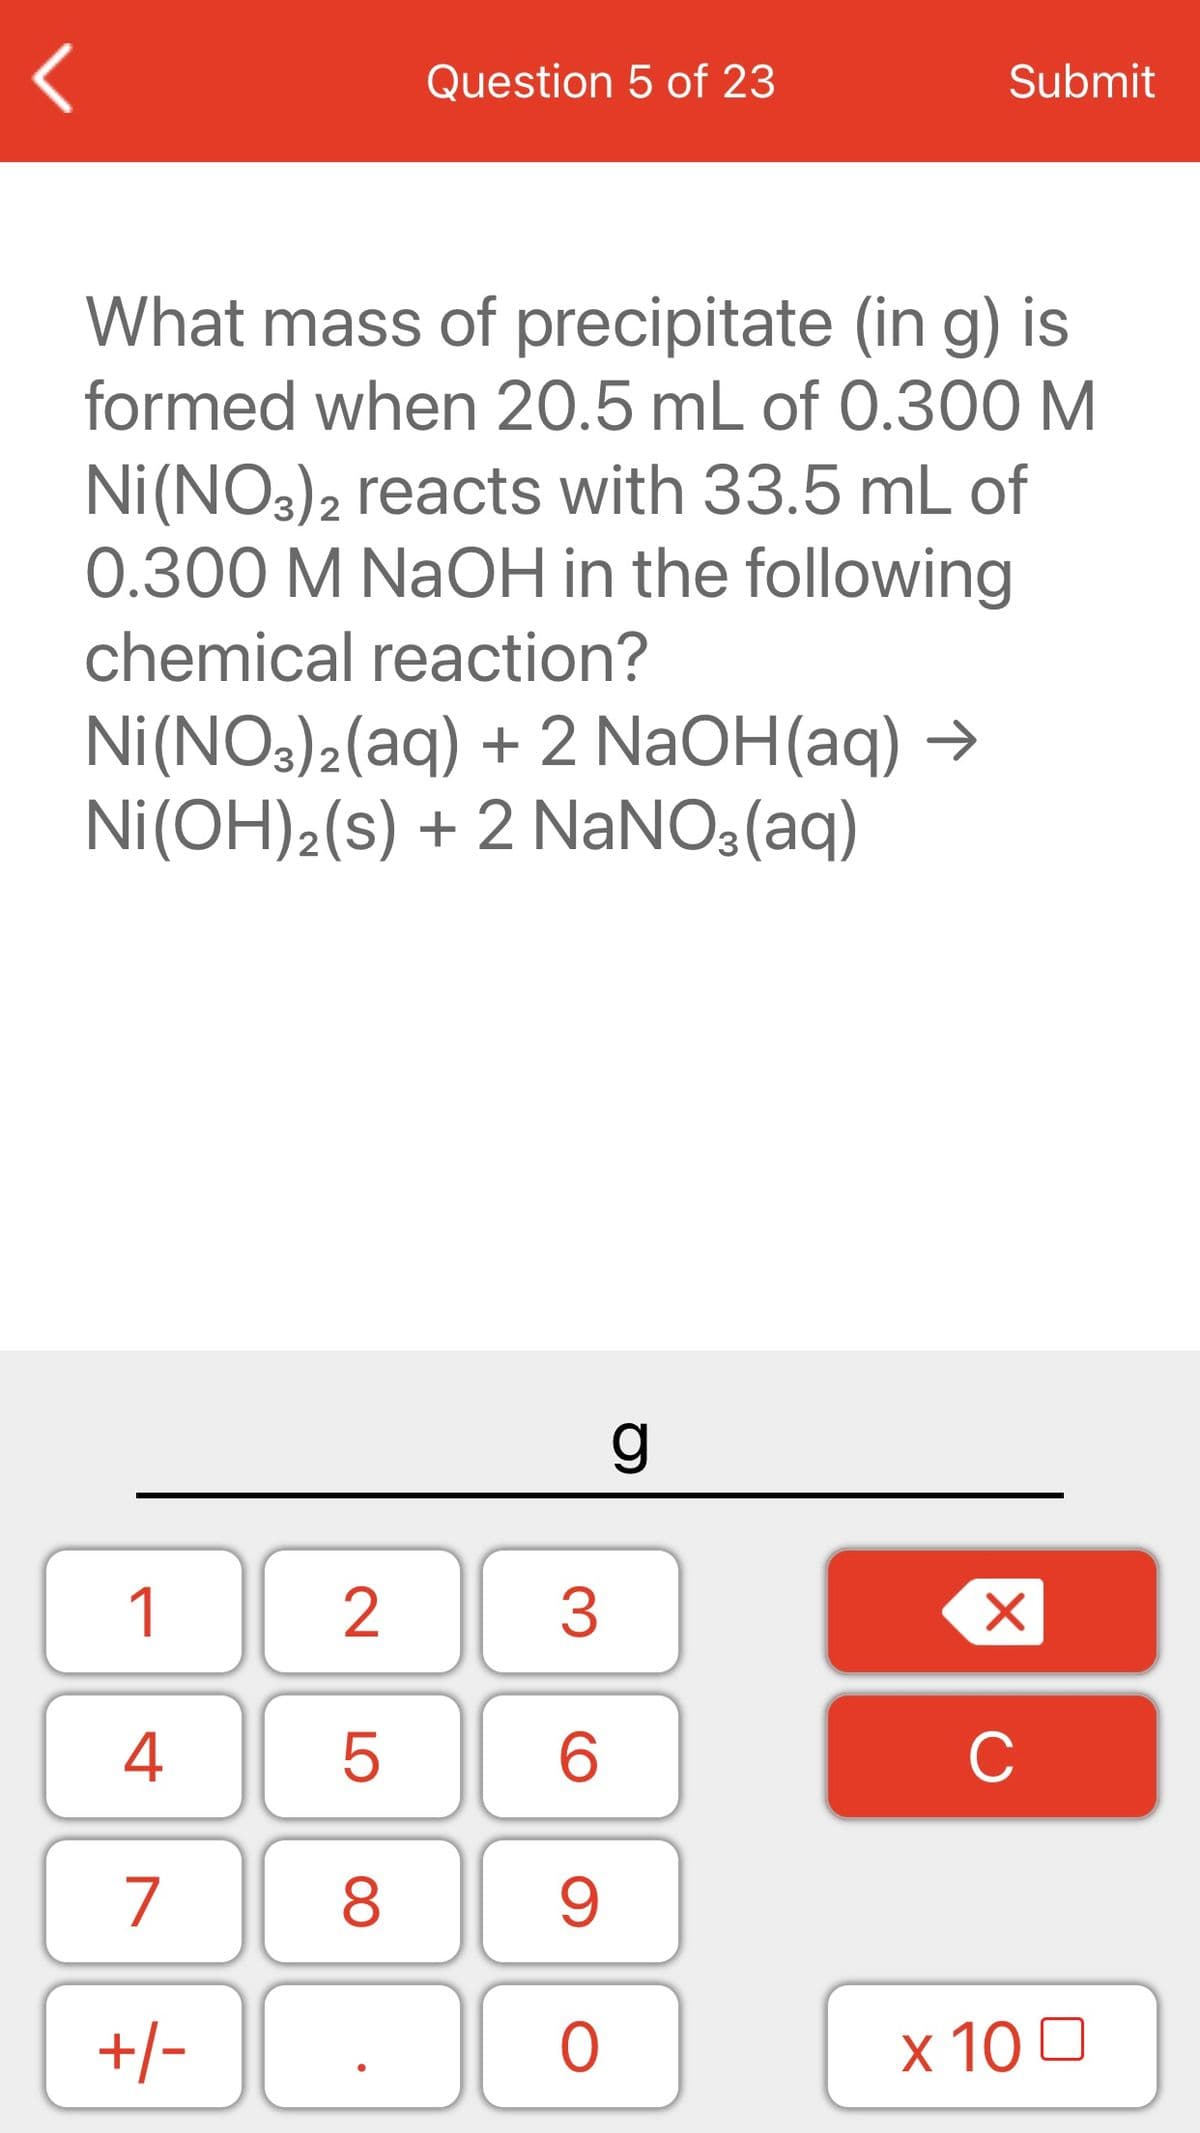 Question 5 of 23
Submit
What mass of precipitate (in g) is
formed when 20.5 mL of 0.300 M
Ni(NO3)2 reacts with 33.5 mL of
0.300 M NAOH in the following
chemical reaction?
Ni(NOs)2(aq) + 2 NaOH(aq) →
Ni(OH)2(s) + 2 NaNO3(aq)
g
1
2
3
4
C
7
+/-
х 100
LO
00
